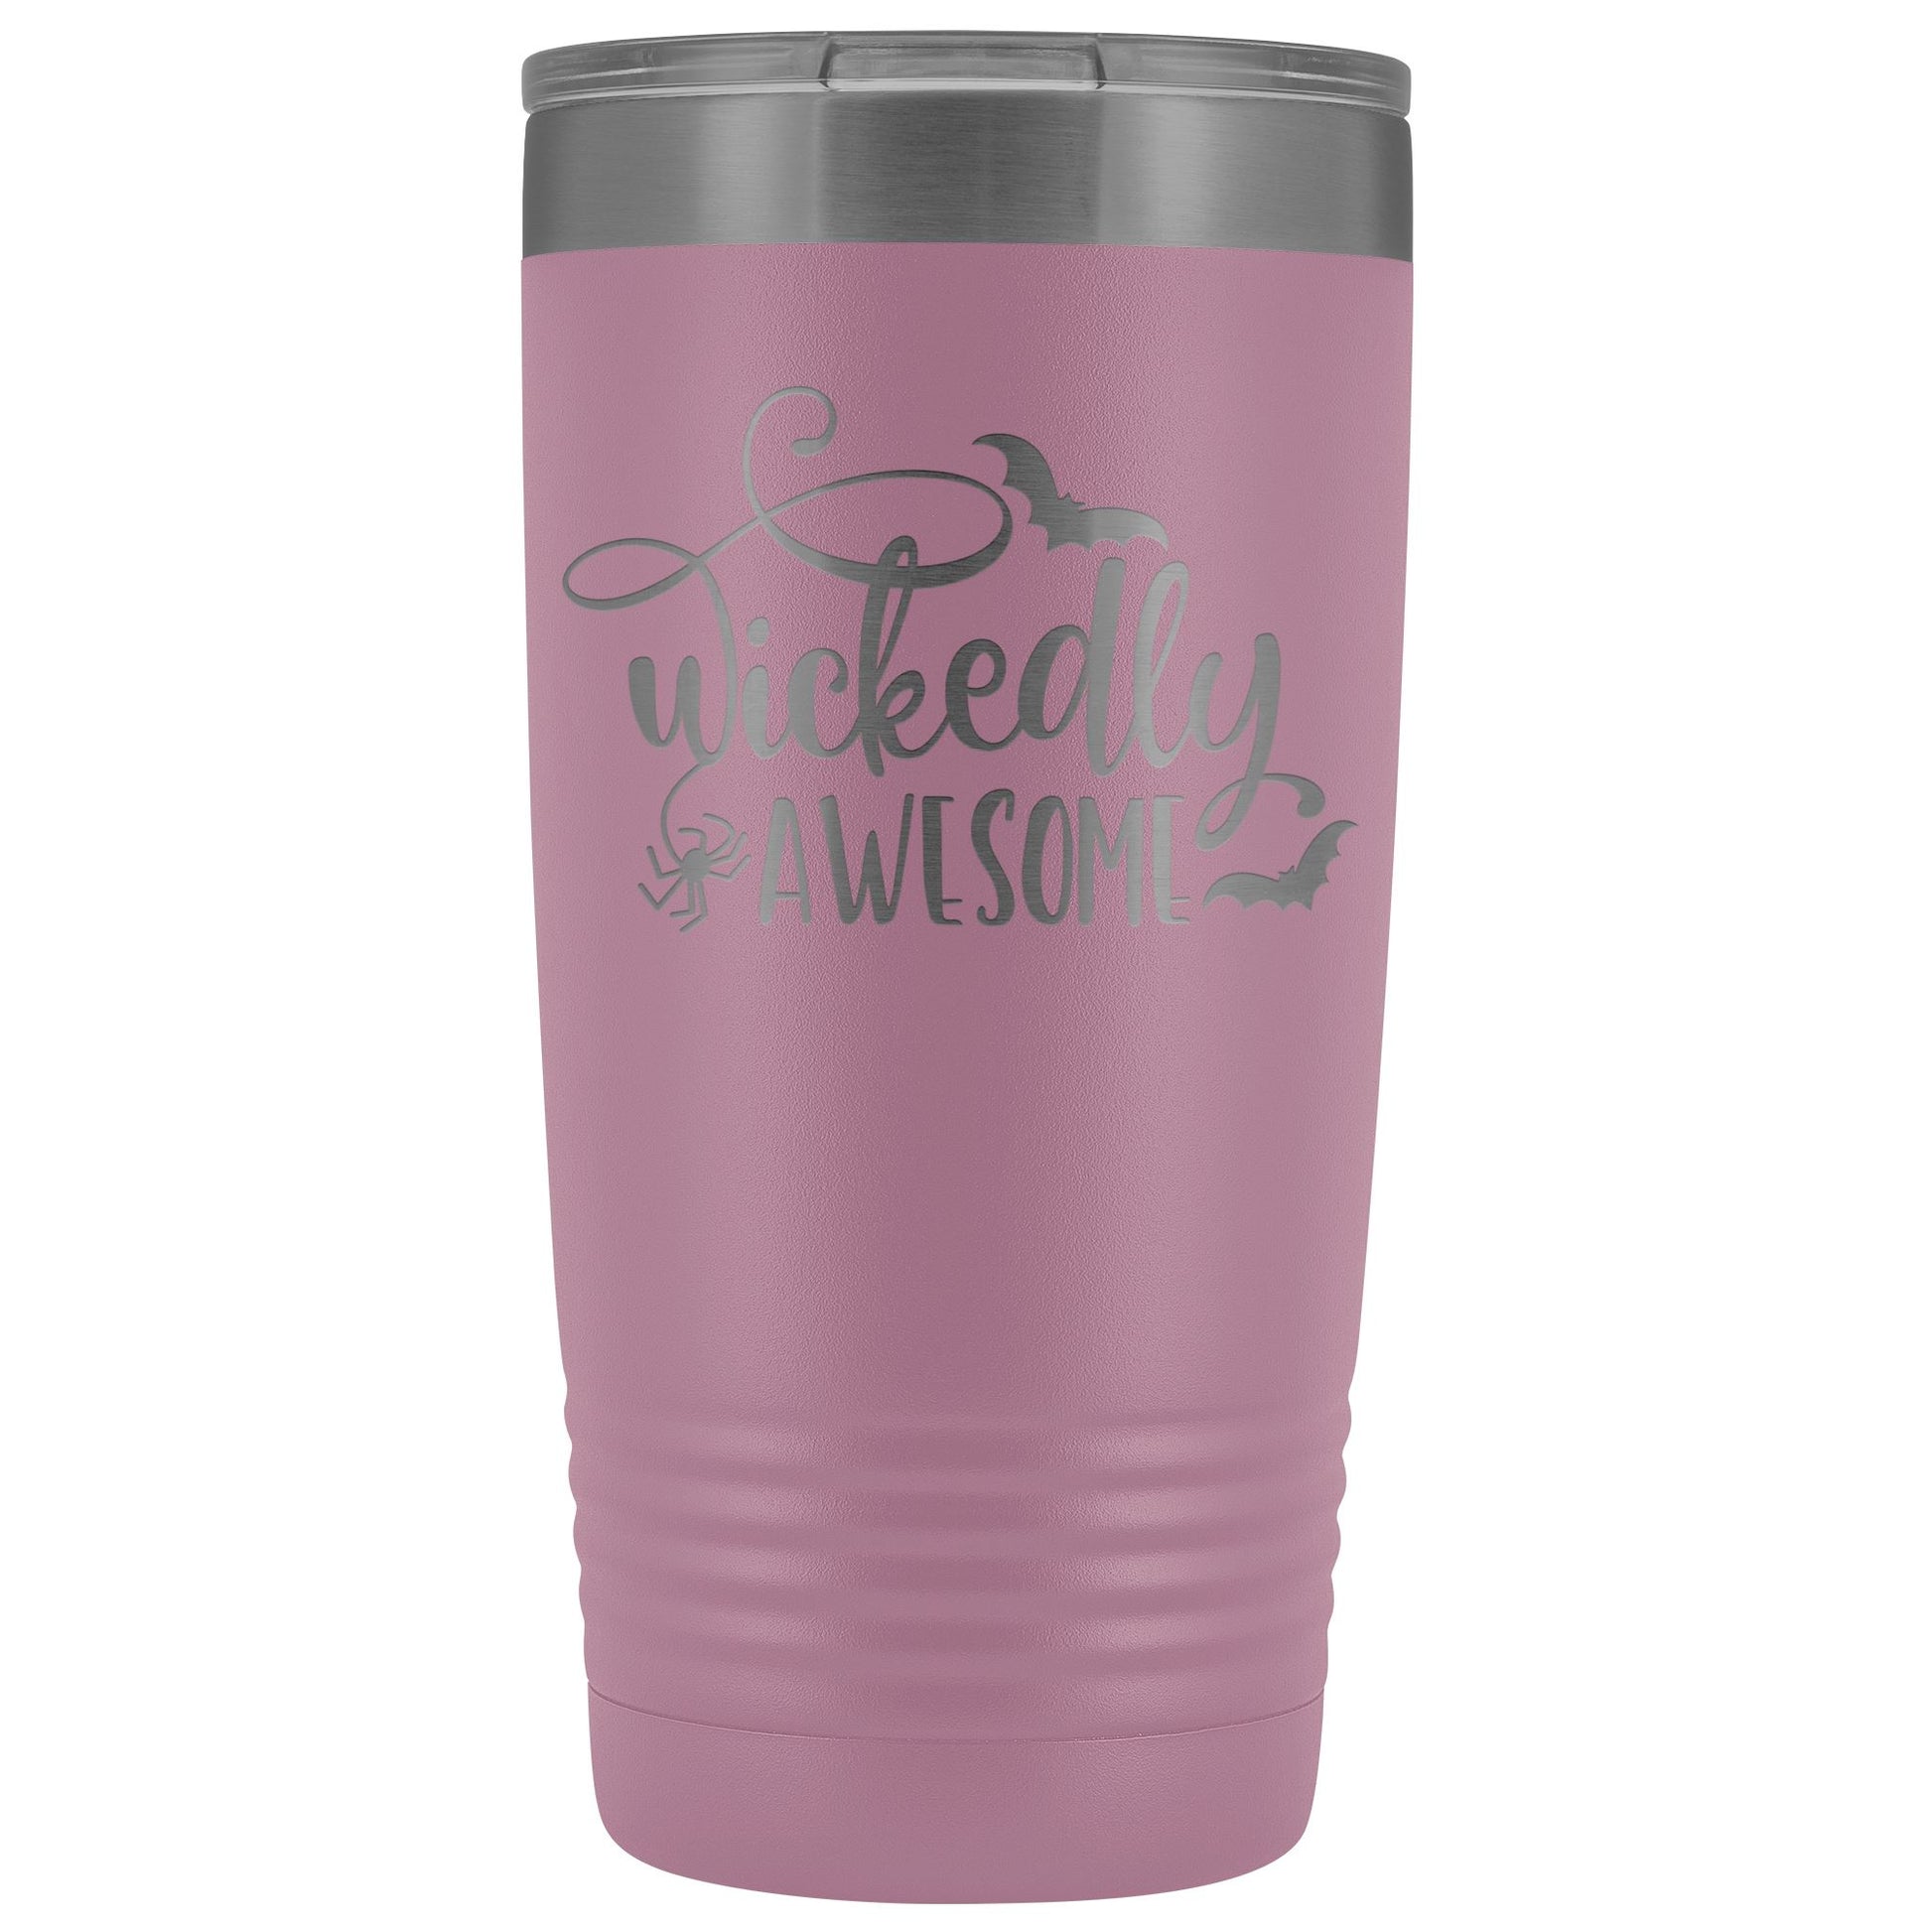 Wickedly Awesome 20oz. Halloween Tumbler